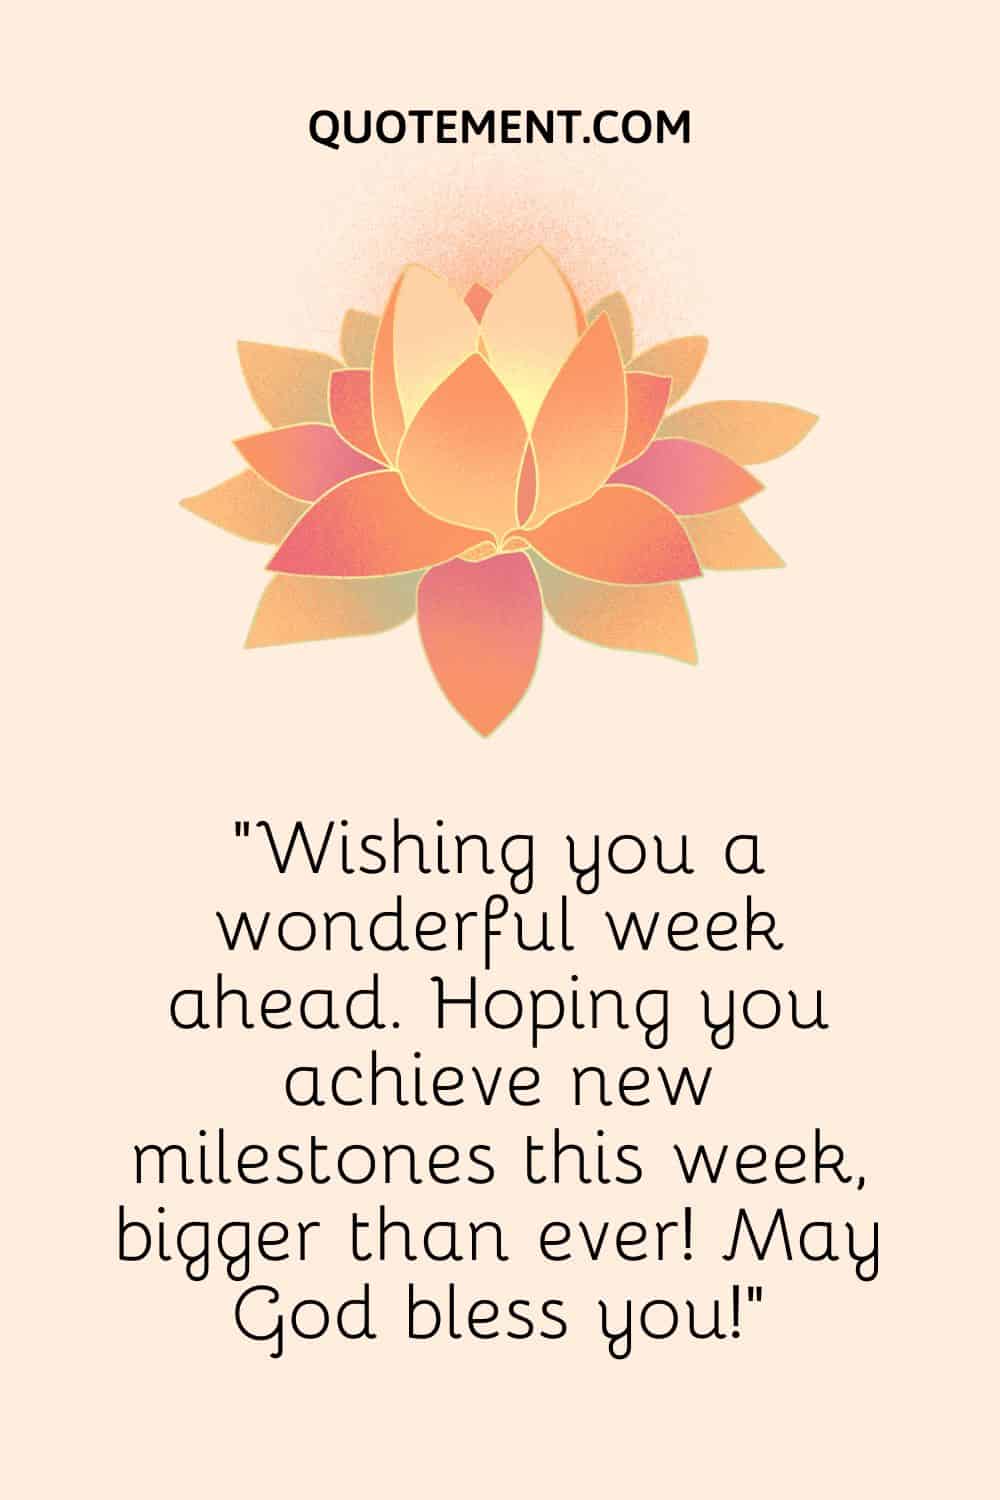 Hoping you achieve new milestones this week,